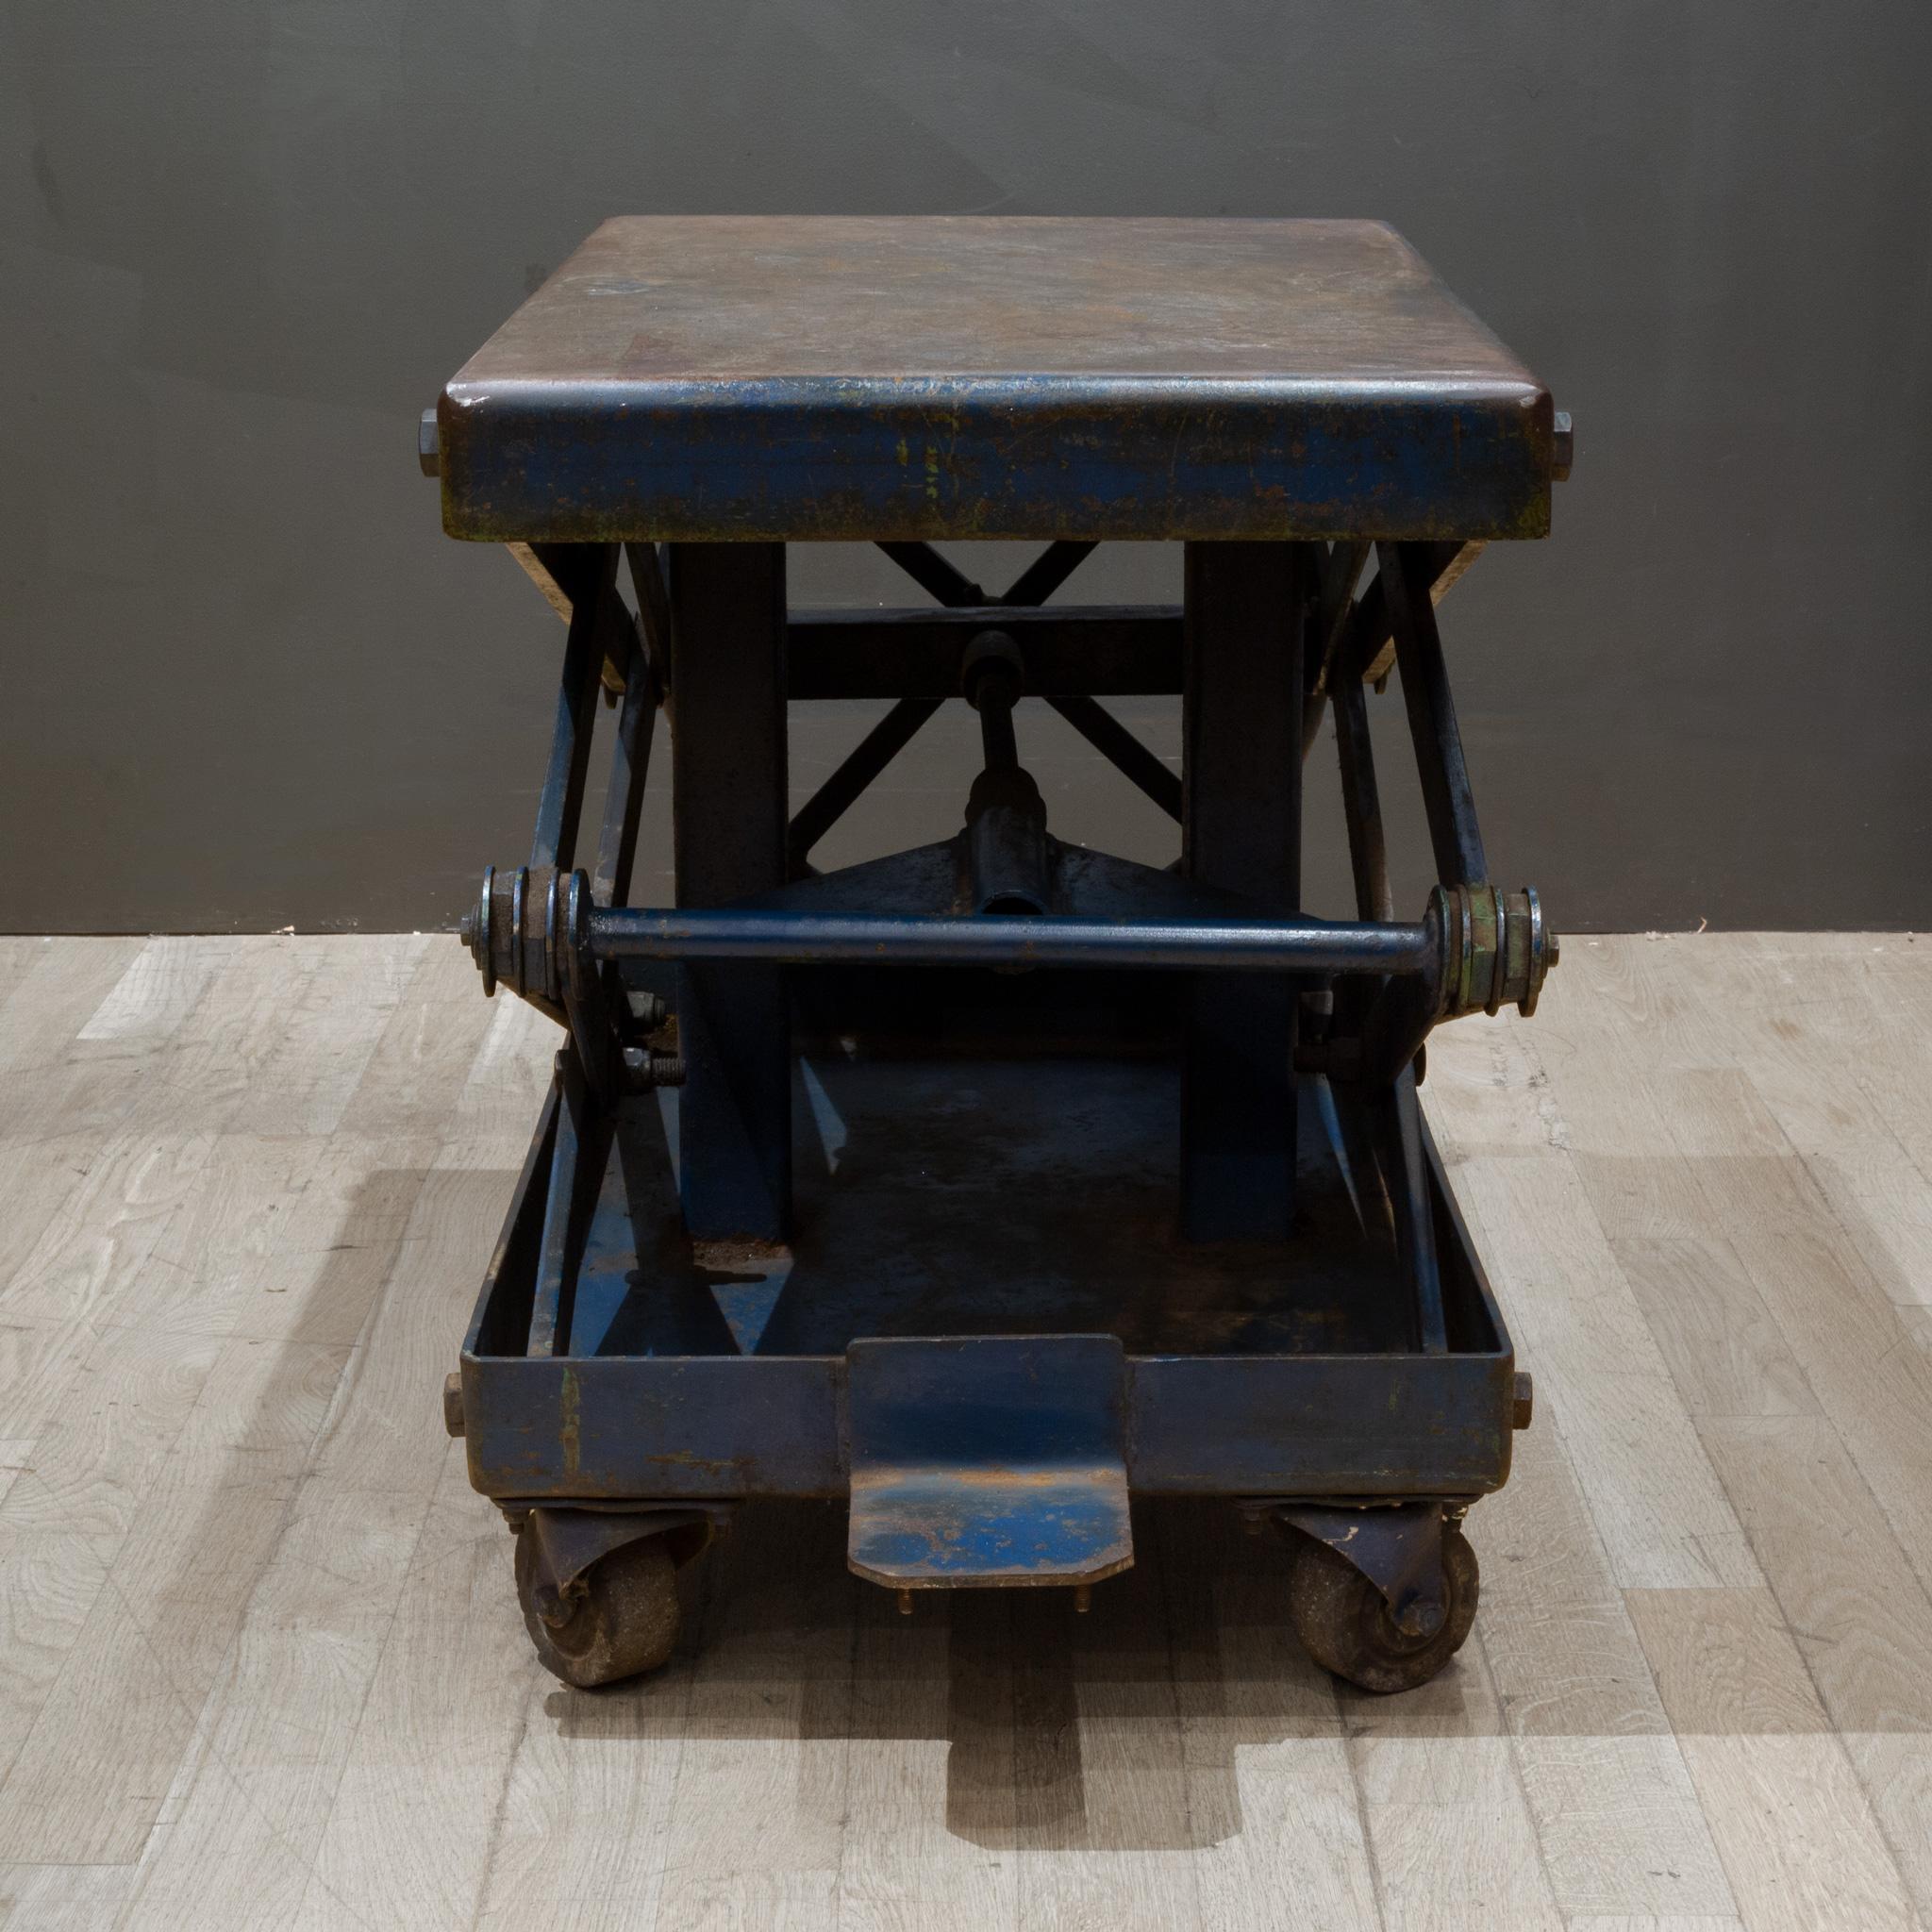 20th Century Early 20th c. Factory Scissor Lift Table c.1940